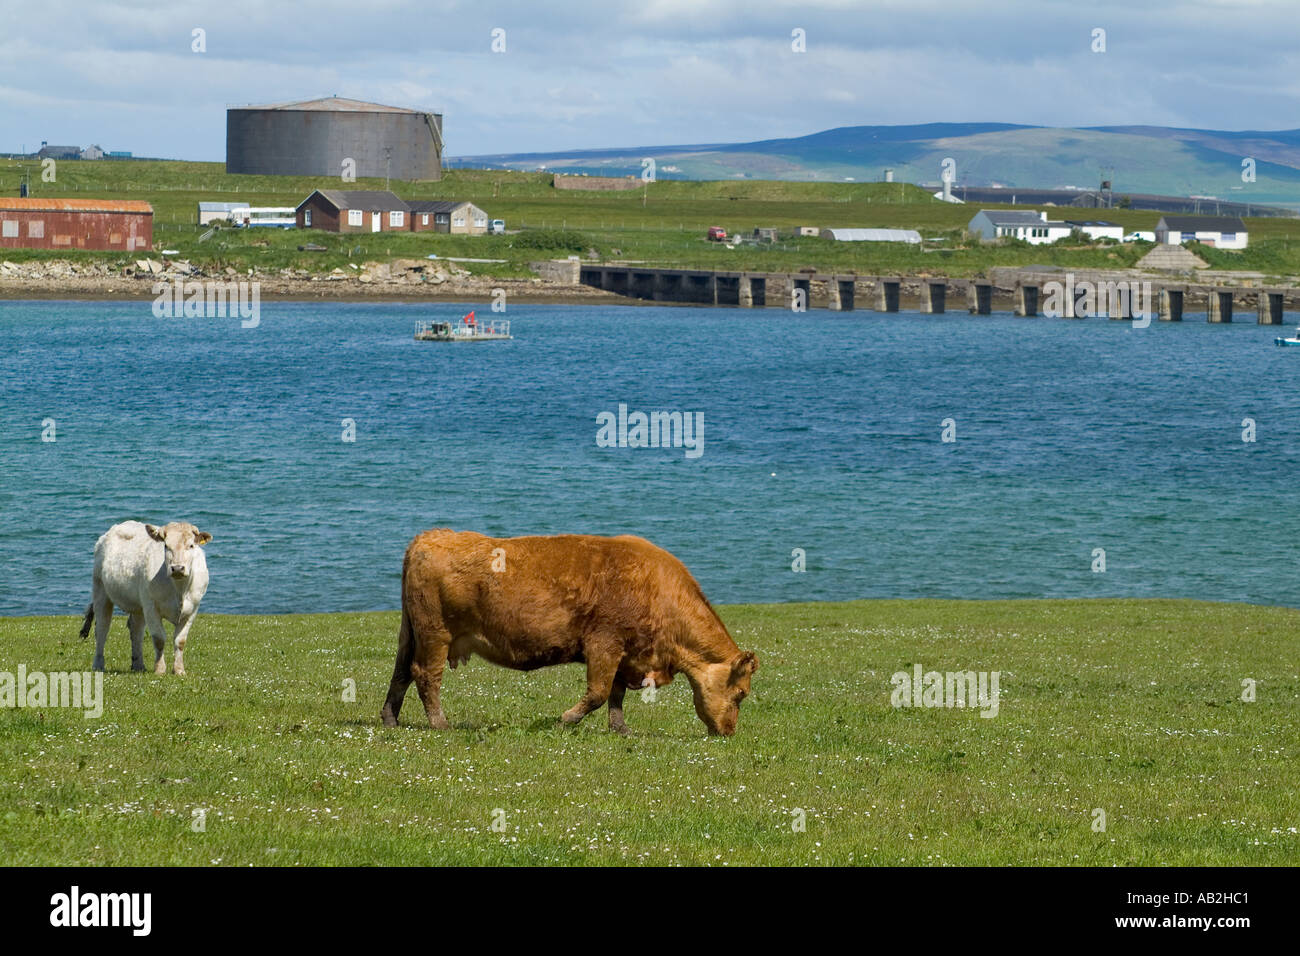 dh Lyness HOY ORKNEY Beef cattle grazing in field Heritage centre Oil tank cows eating grass Stock Photo